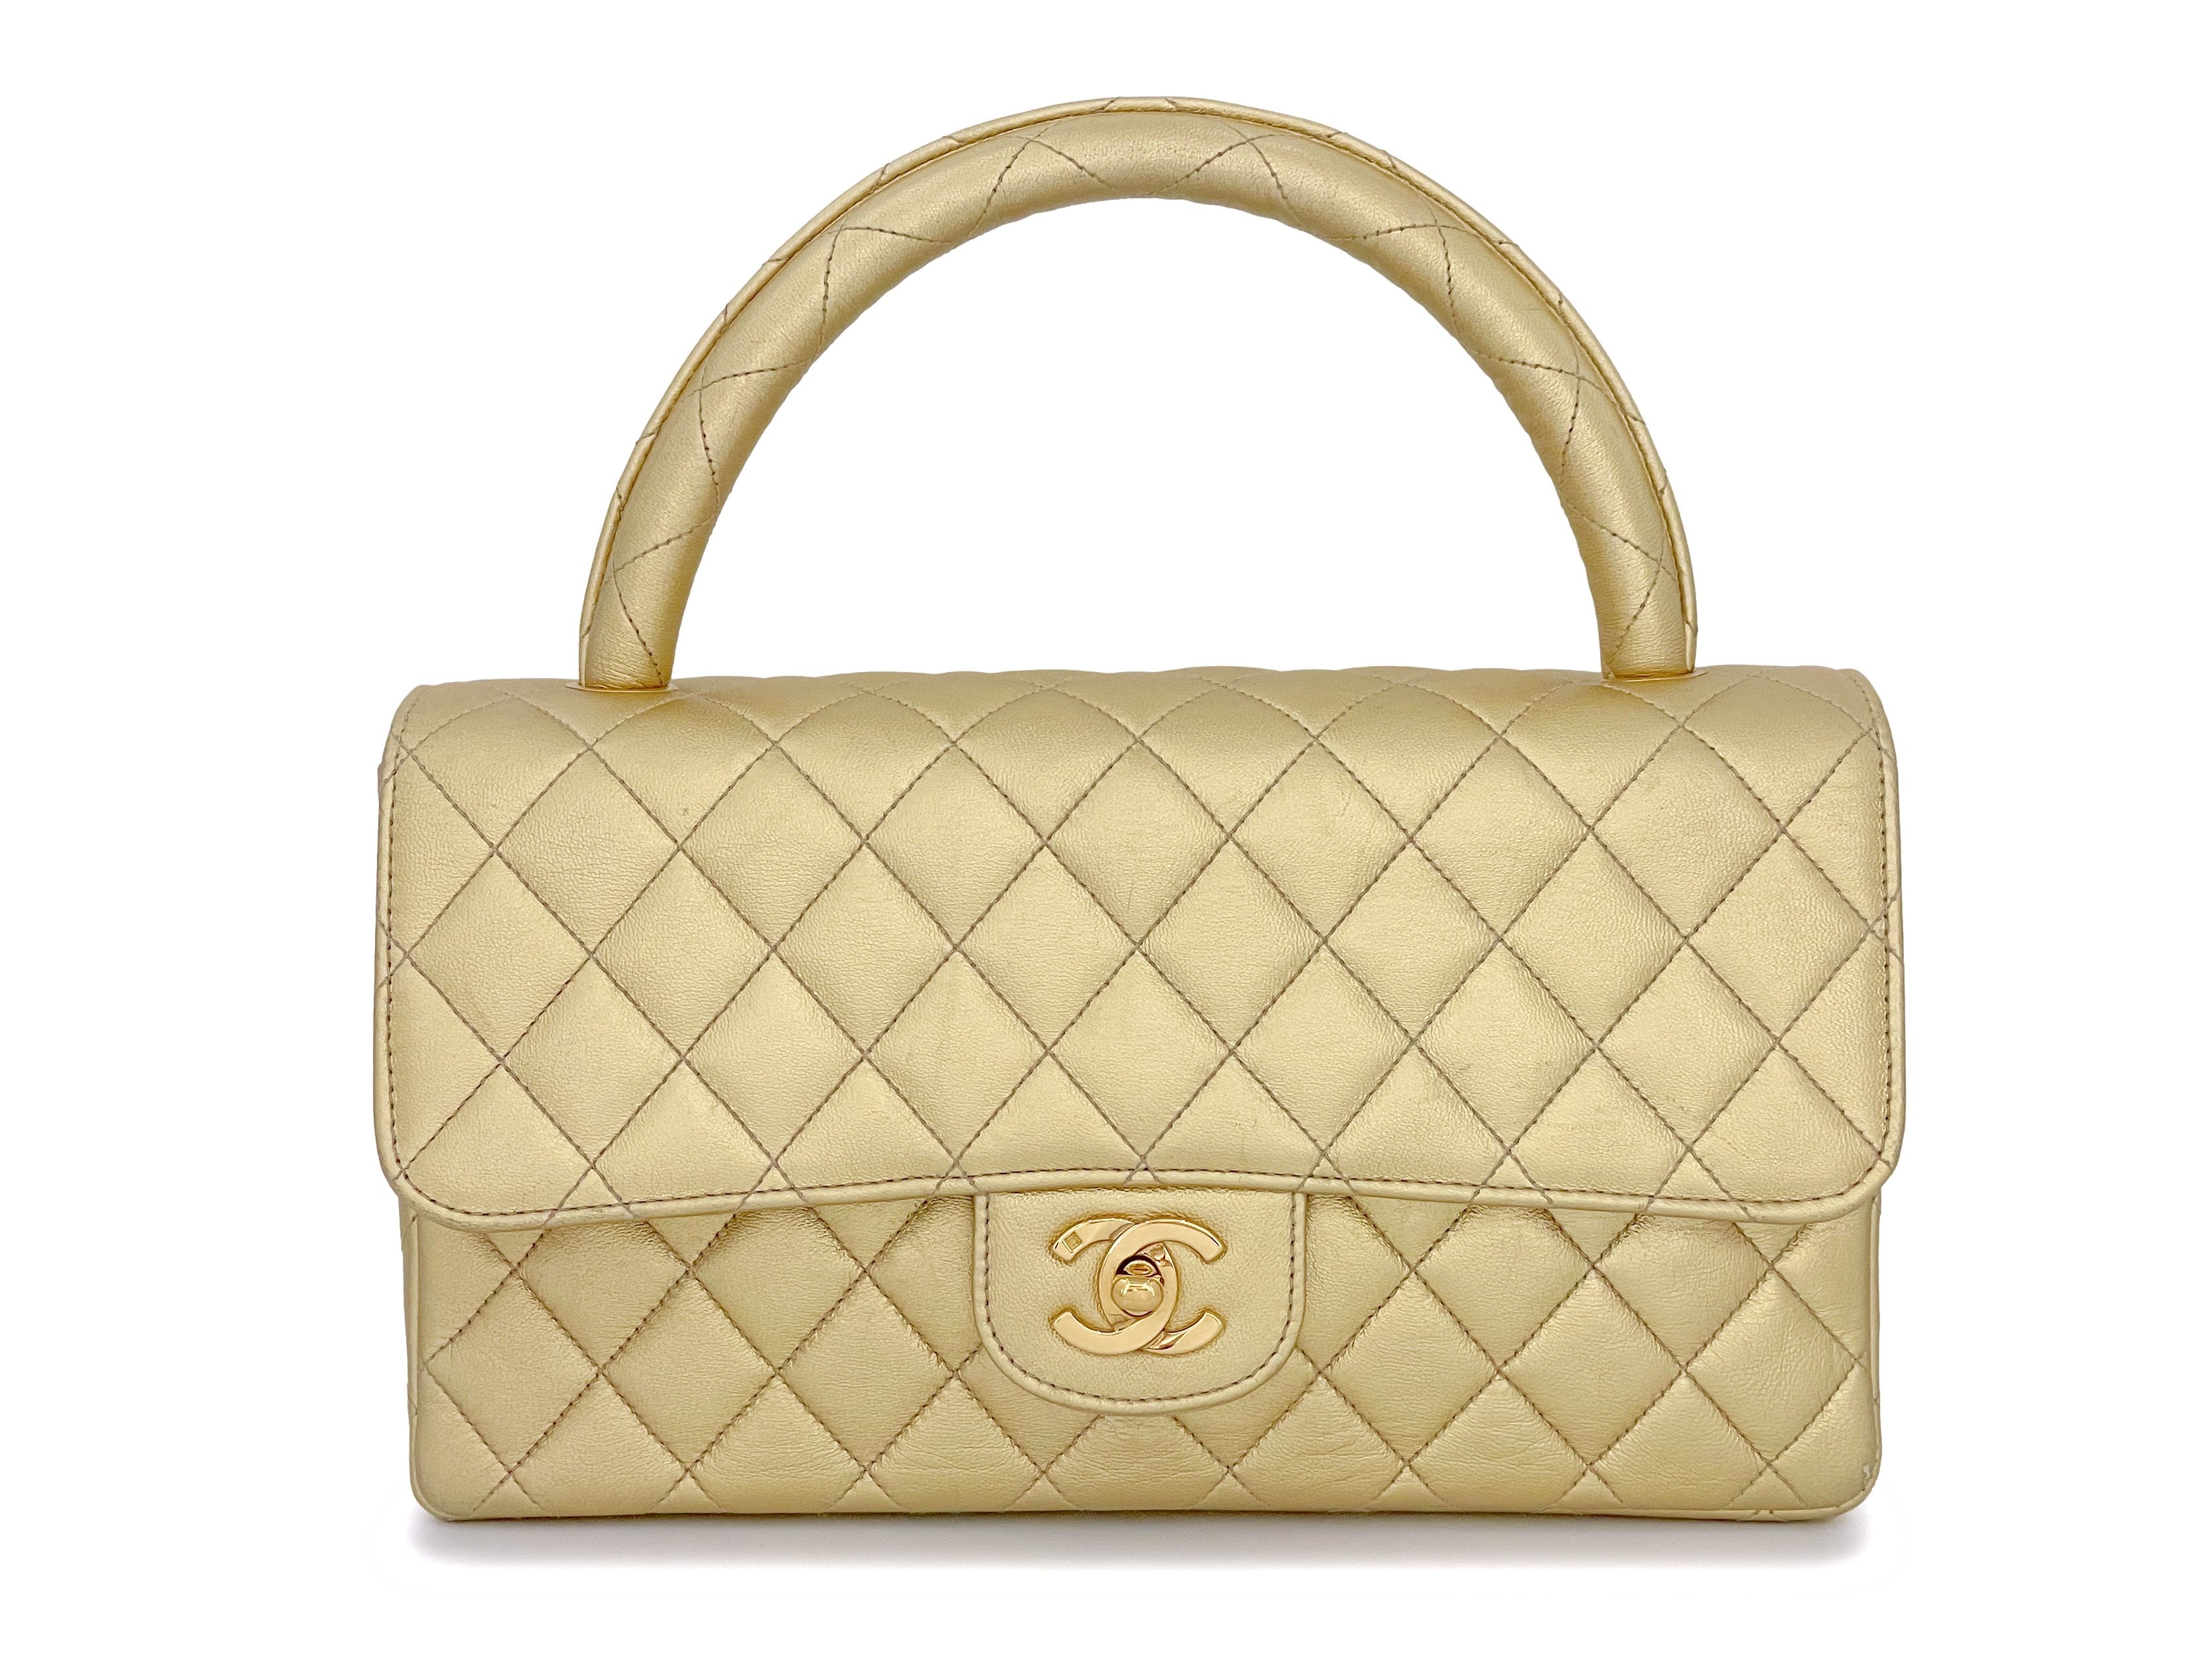 What is the quality of handbags from the British luxury house, Launer, as  compared to bags from classical luxury houses such as Louis Vuitton, Chanel  and Hermes? - Quora